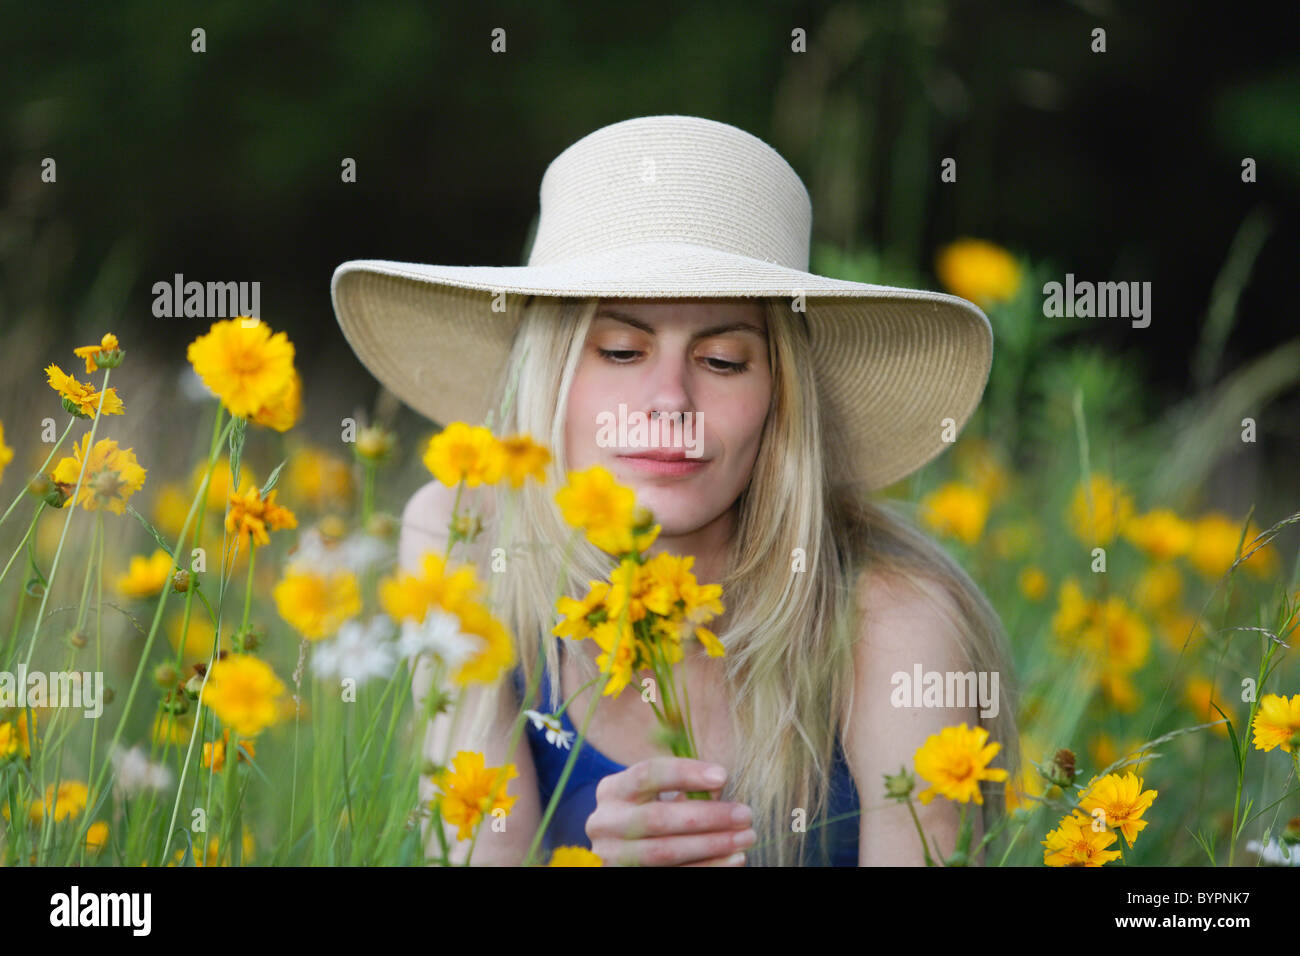 Portrait of a Young Woman in a Meadow with Wildflowers, New Jersey Stock Photo